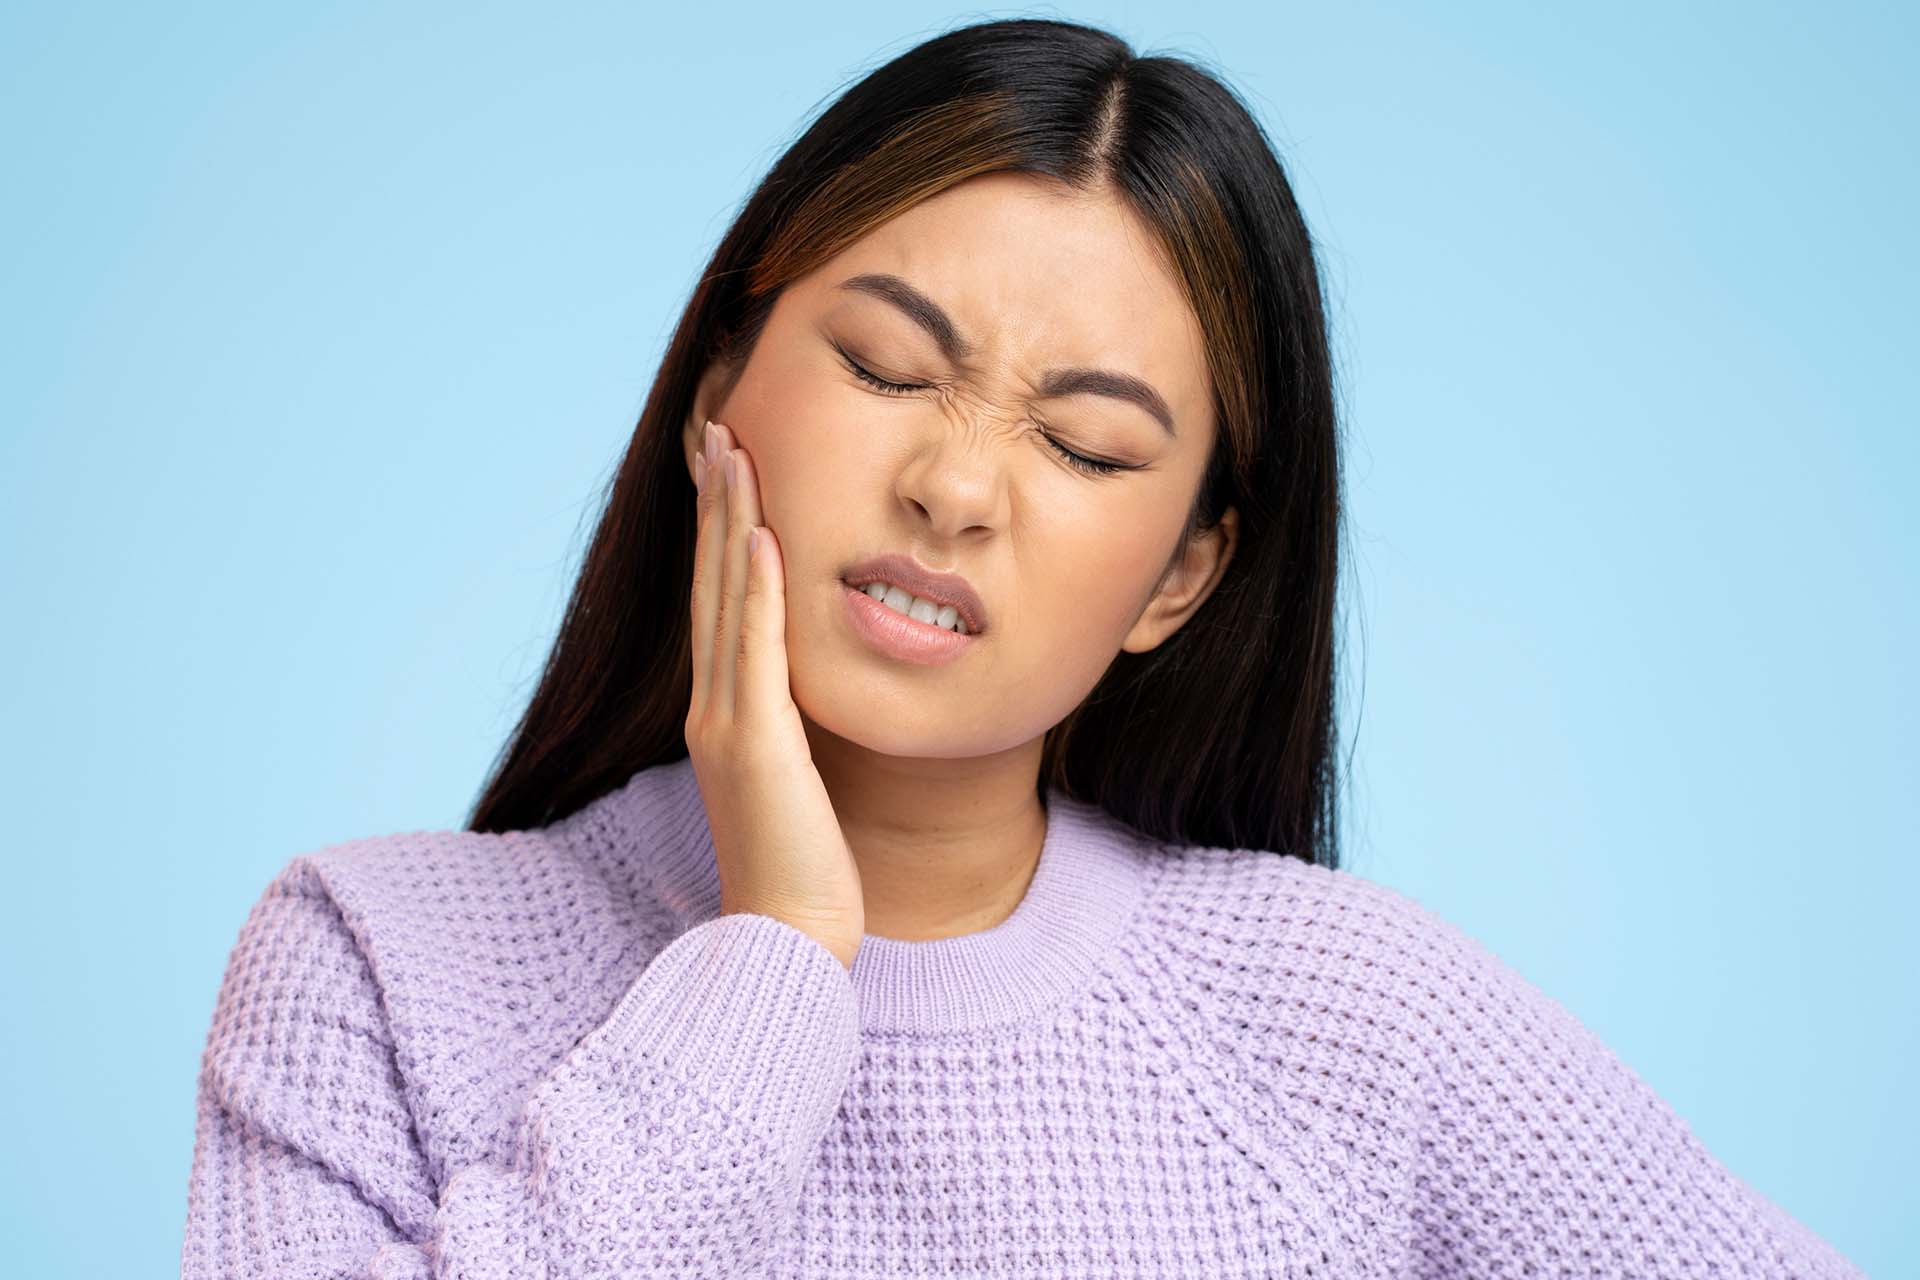 Studio City, Los Angeles woman wincing and holding her lower jaw as she looks for a TMJ specialist near Los Angeles to relief her facial pain.